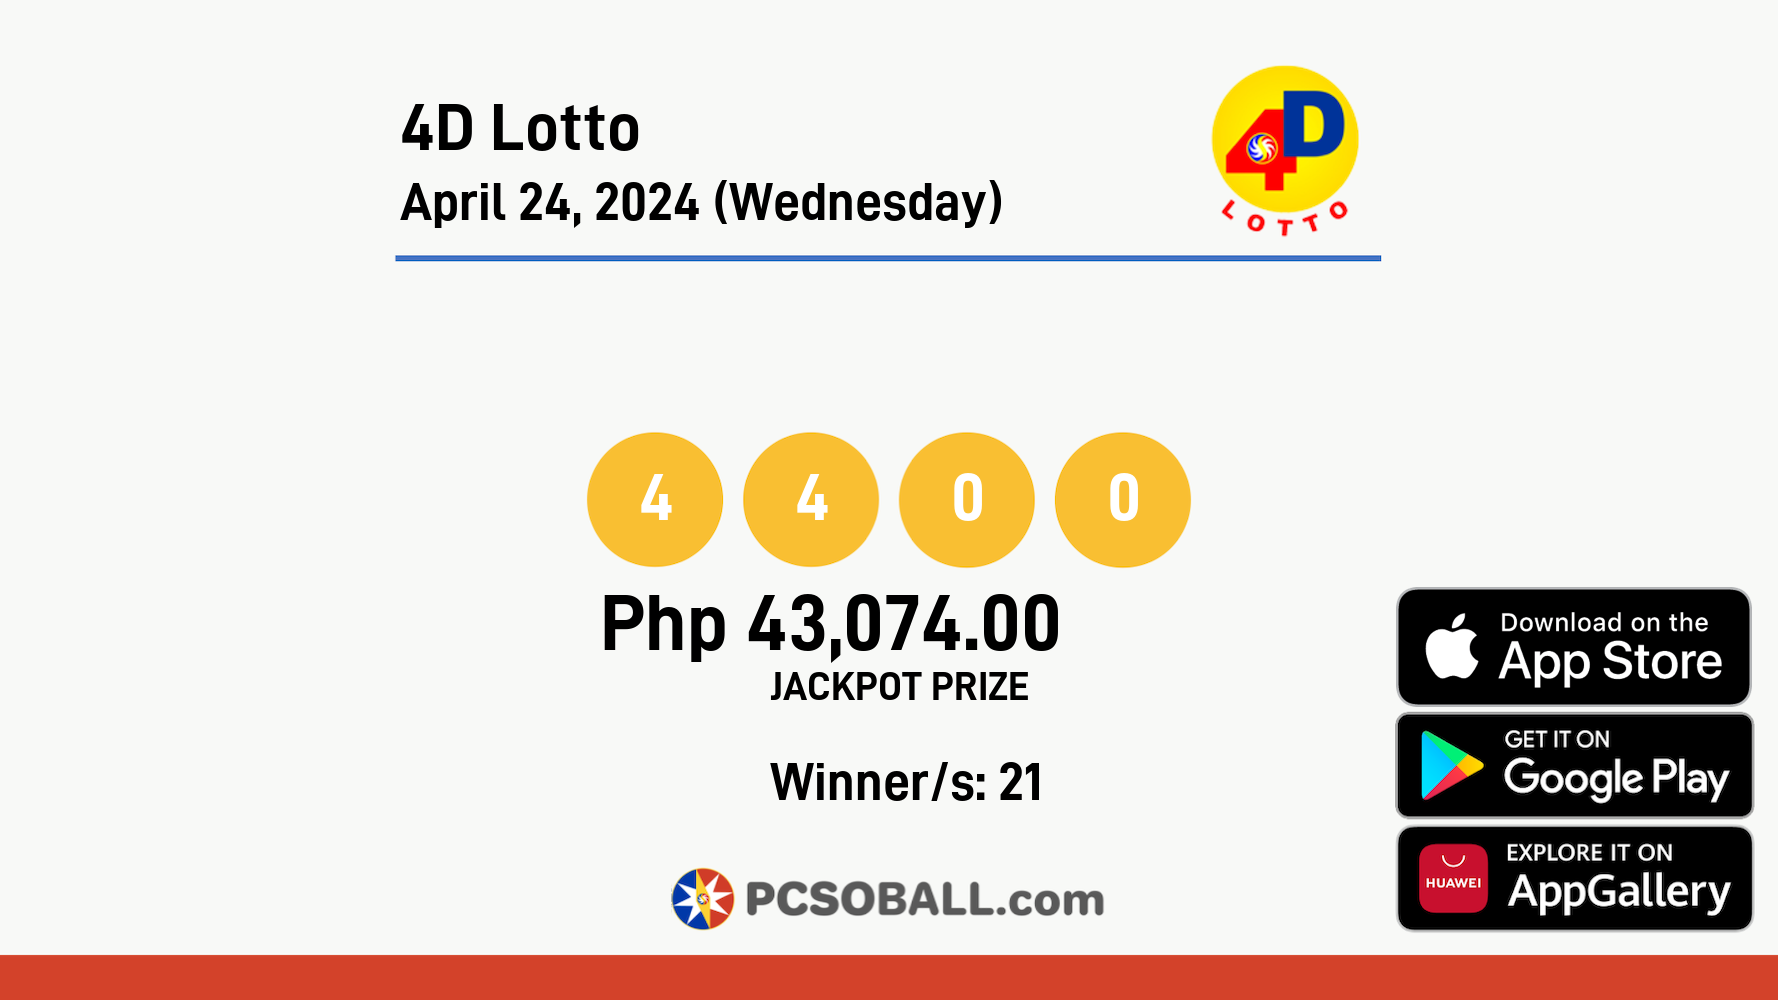 4D Lotto April 24, 2024 (Wednesday) Result